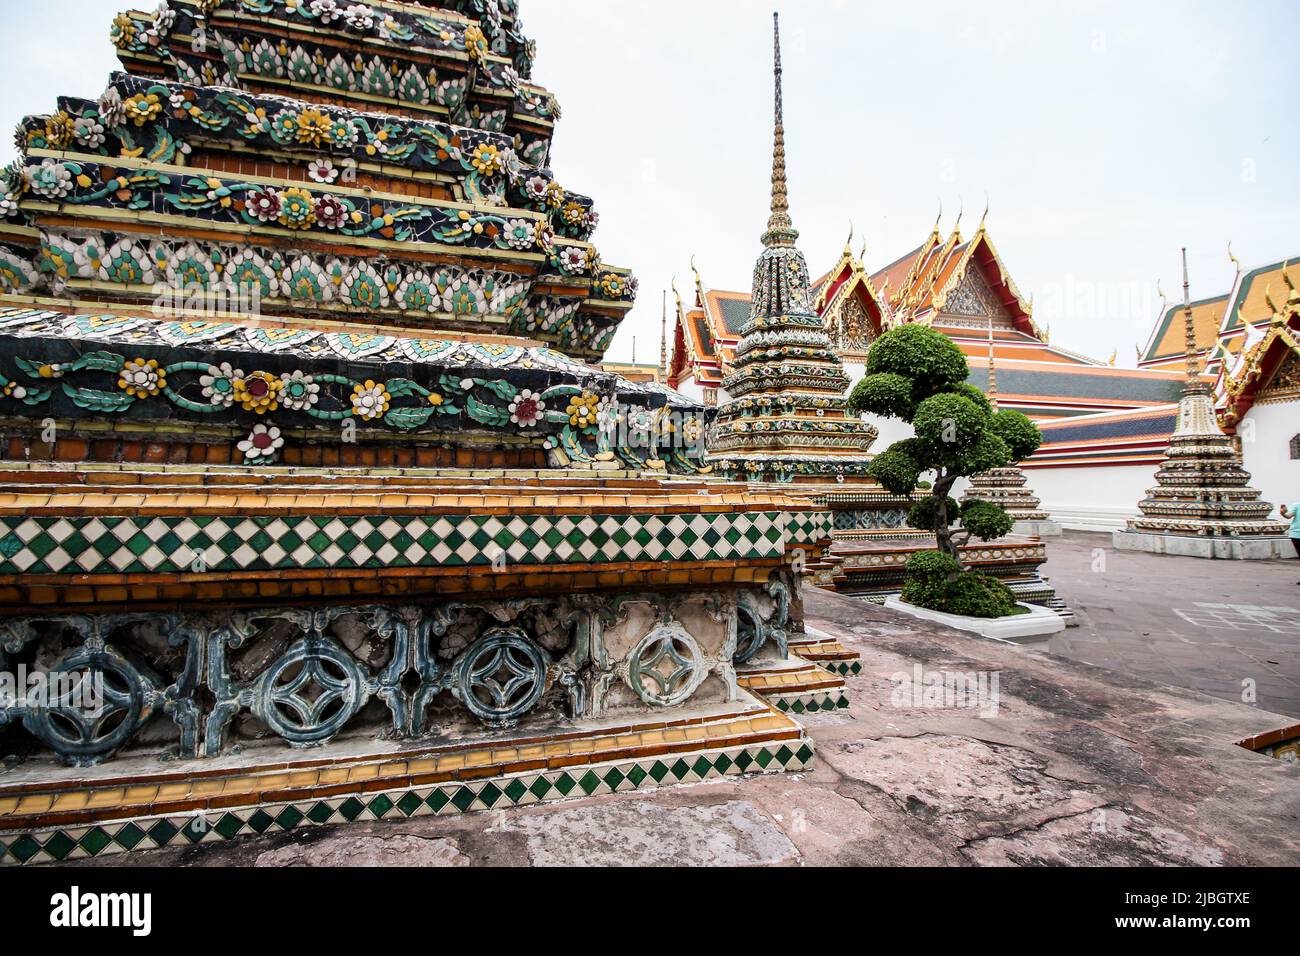 Bangkok, Thailand - Mar. 15 2017: Wat Pho, Bangkok. Wat Pho is a Buddhist temple complex in the Phra Nakhon District located on Rattanakosin Island. Stock Photo